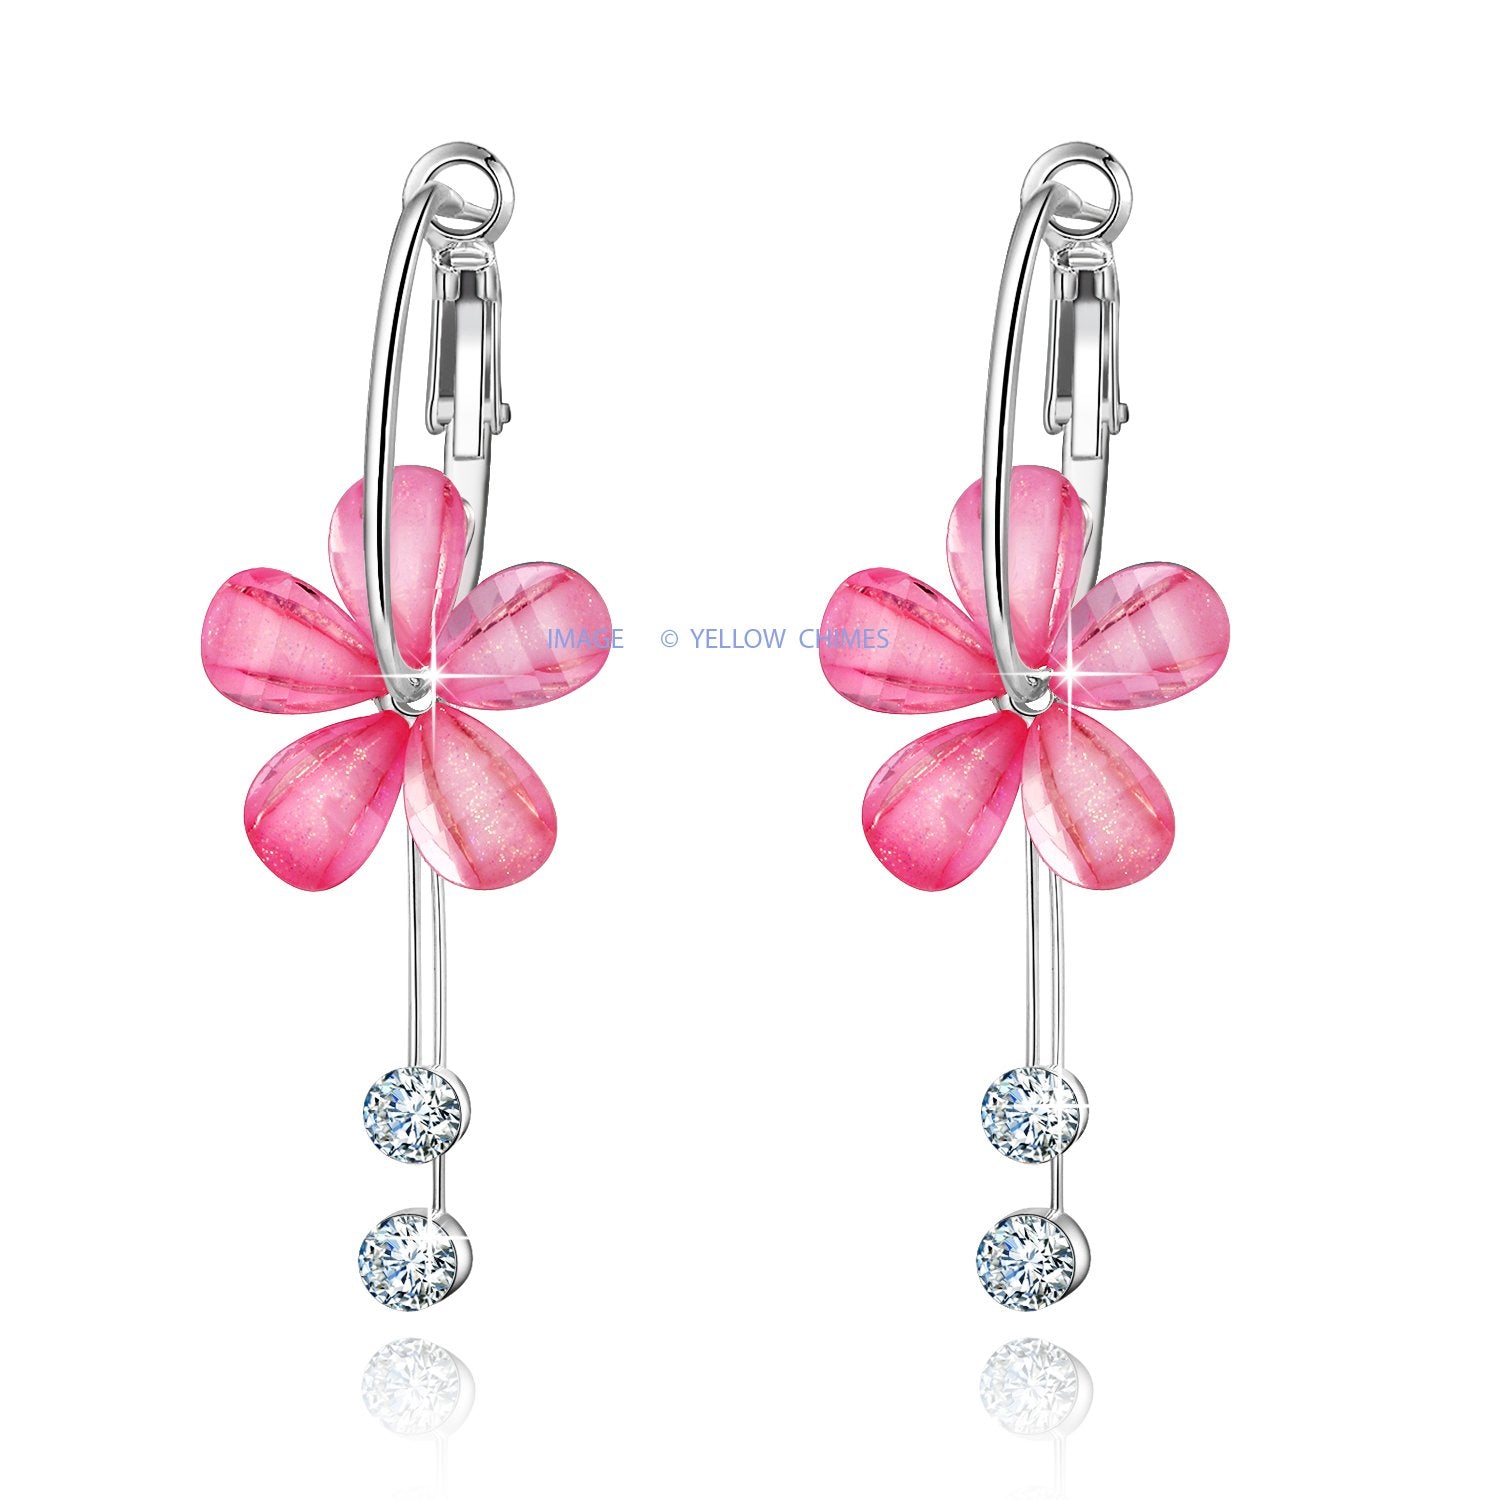 Yellow Chimes Moxie Collection Designer Flower Style Combo of 2 Pairs Floral Hoop Earrings for Women & Girls (Pink and White)